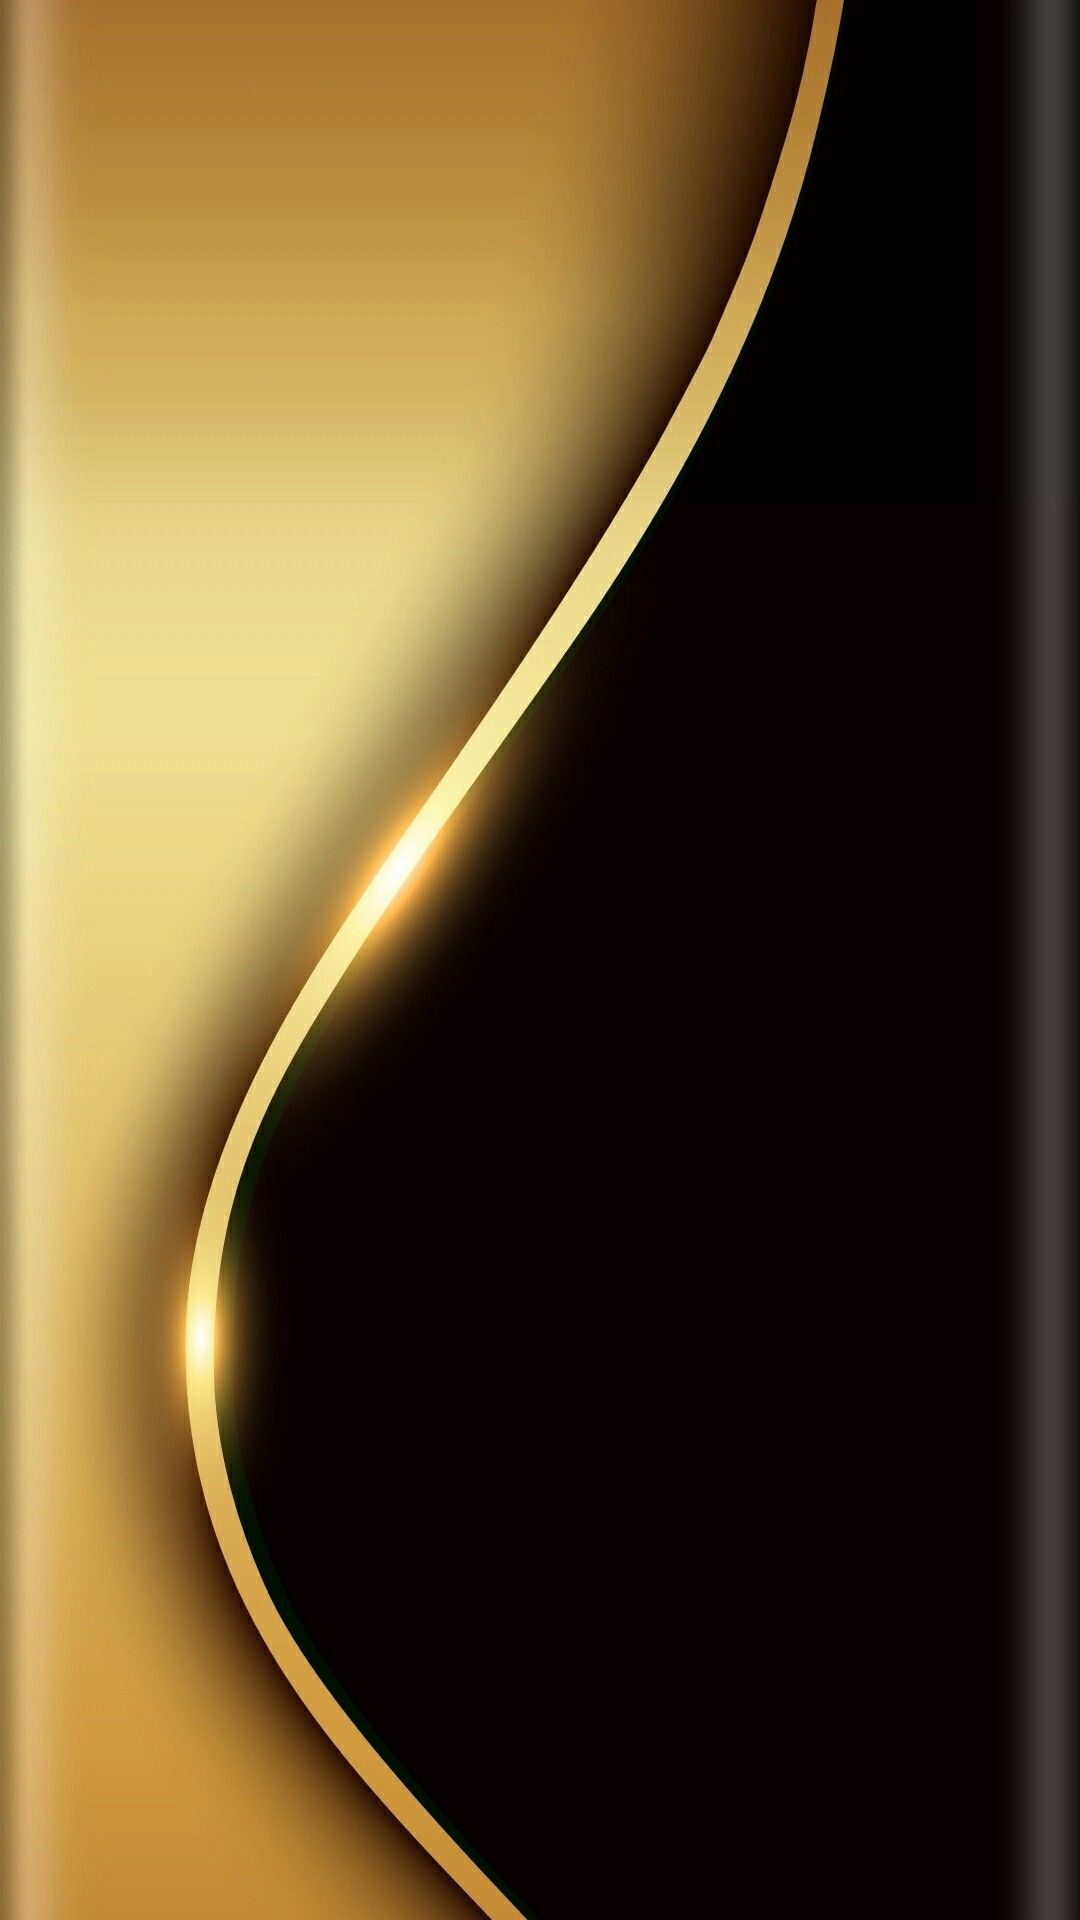 Pin By On Gold 3D Wallpaper. Gold wallpaper, Gold and black wallpaper, Phone wallpaper patterns